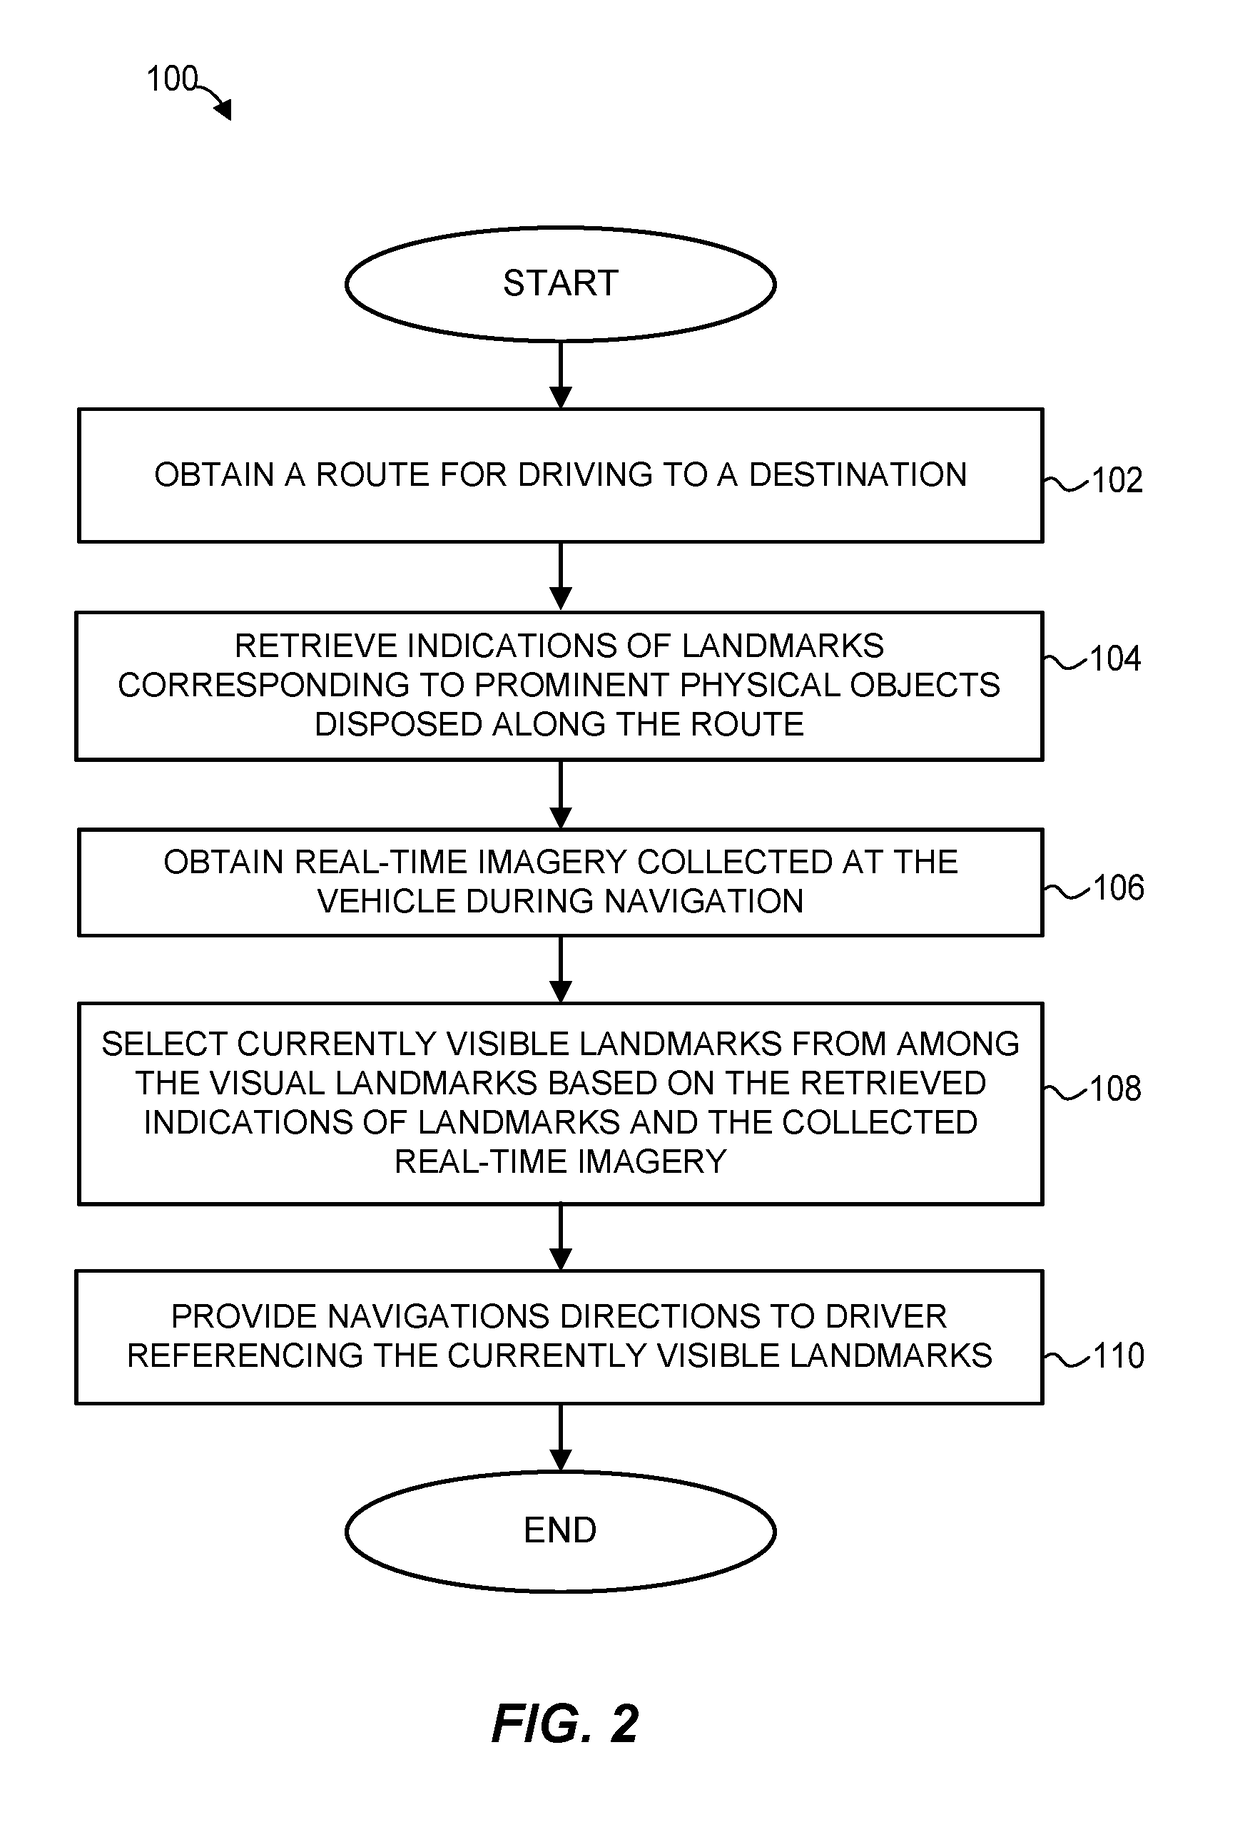 Systems and Methods for Using Real-Time Imagery in Navigation